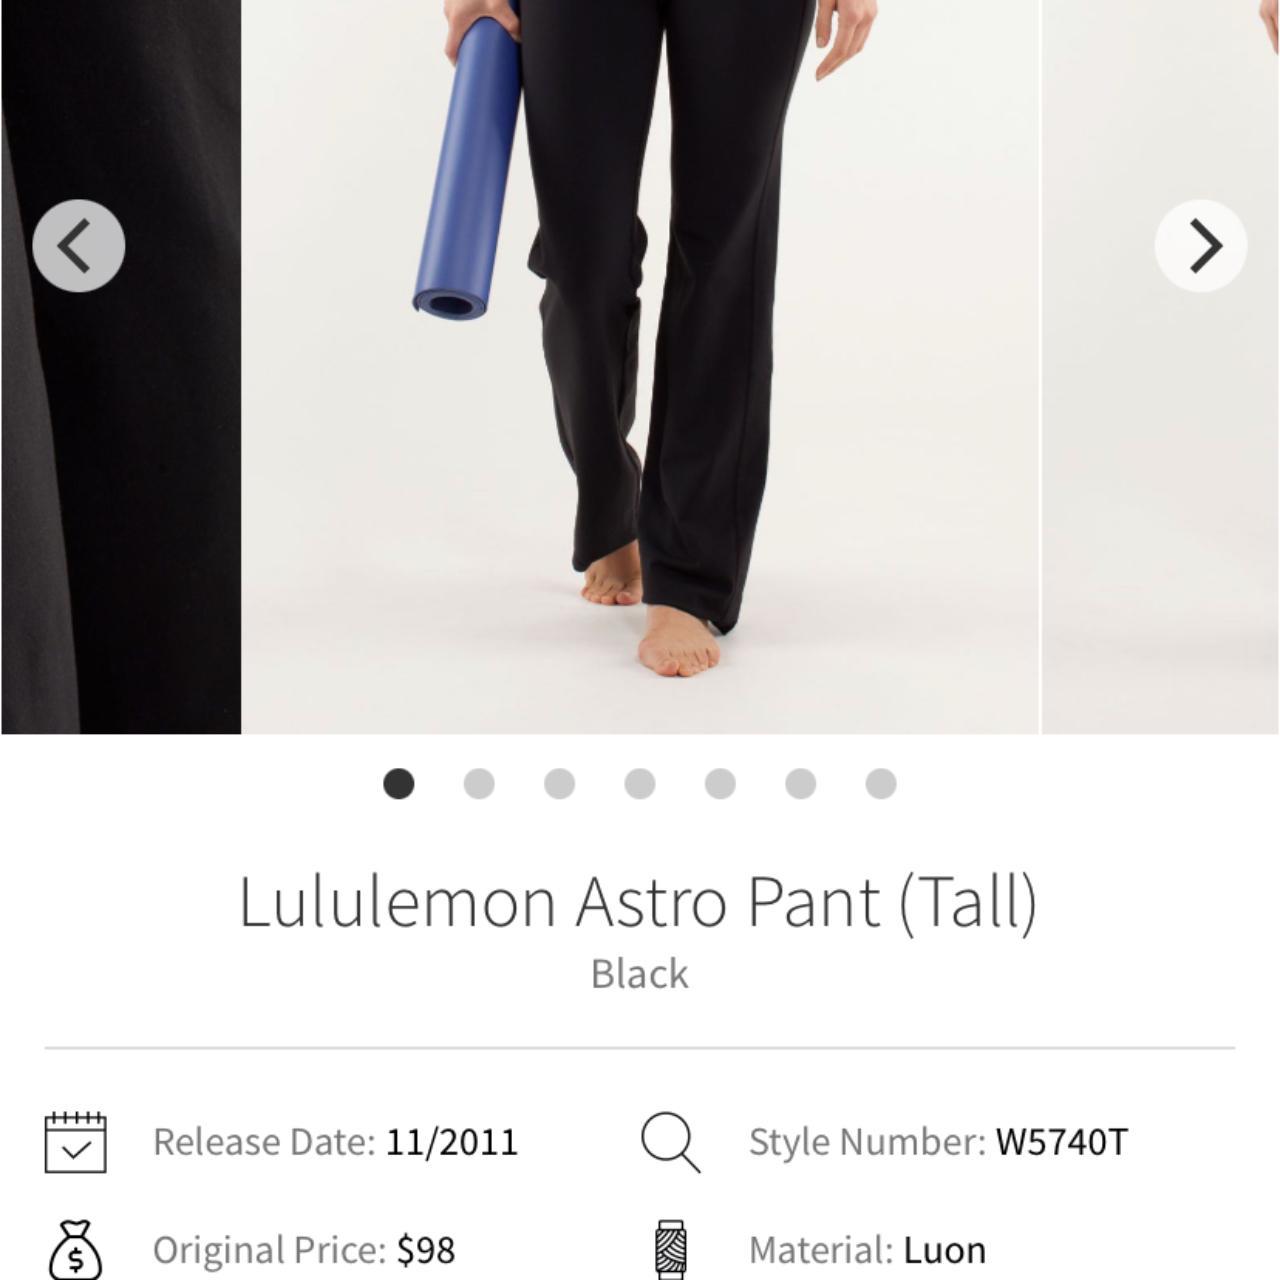 lululemon astro pant v low to mid rise waistband - Depop